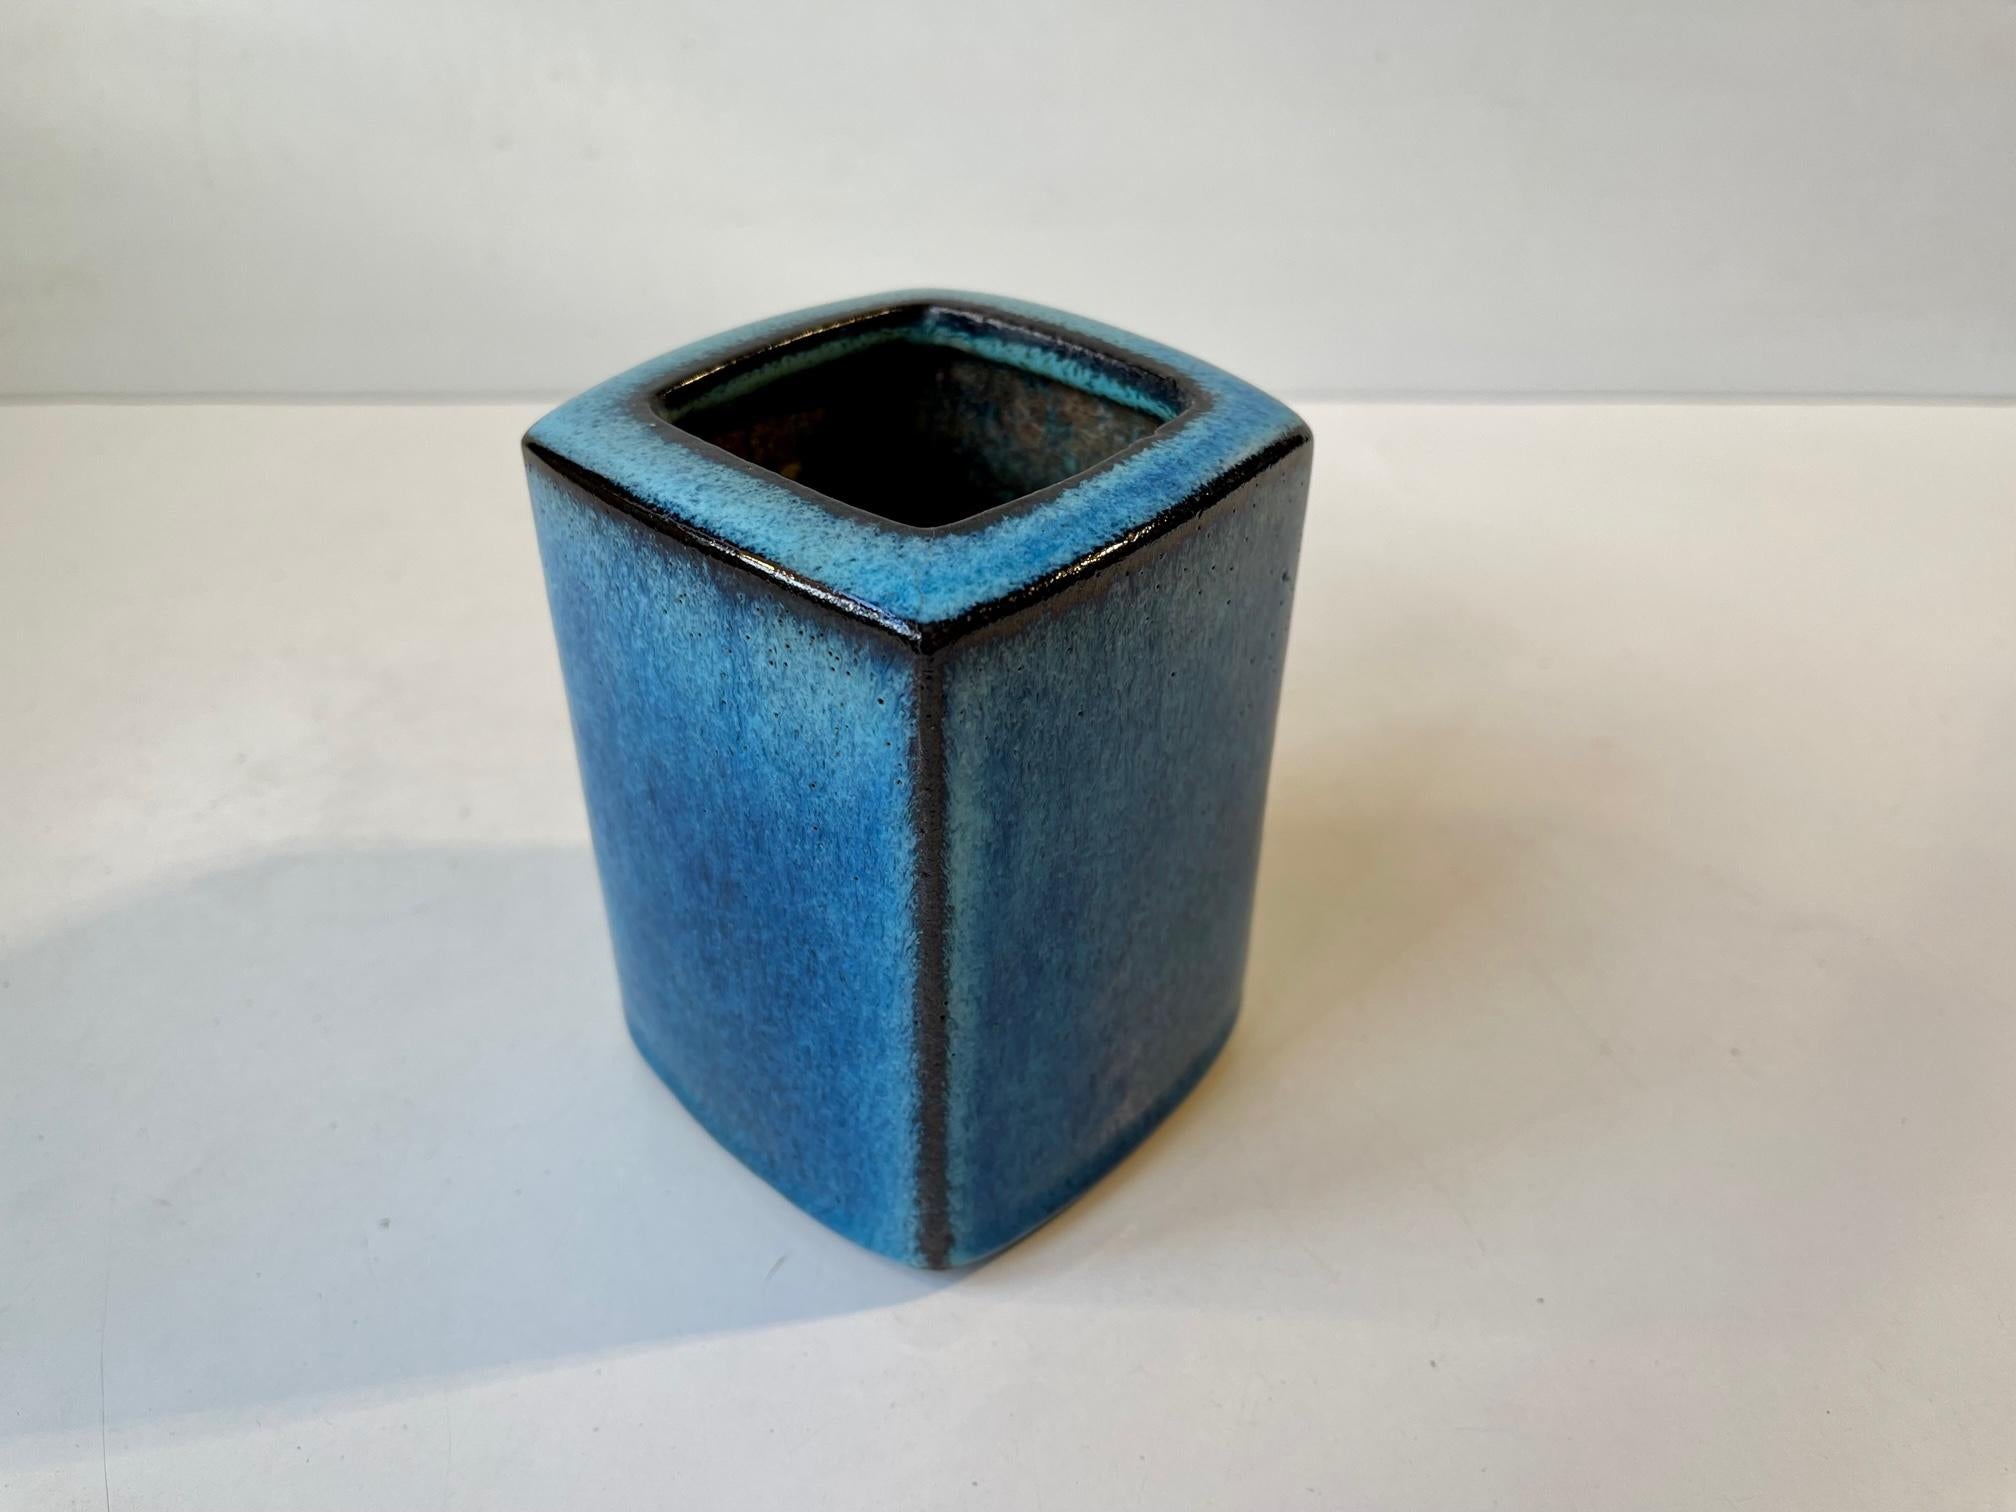 Rectangular vase decorated with a delicate black hight-lighted azure/turquoise blue glaze. Designed by P. Gottshalk-Olsen and manufactured by Stogo in Denmark during the 1970s. Measurements: H: 11.5 cm, W/D: 8 cm.